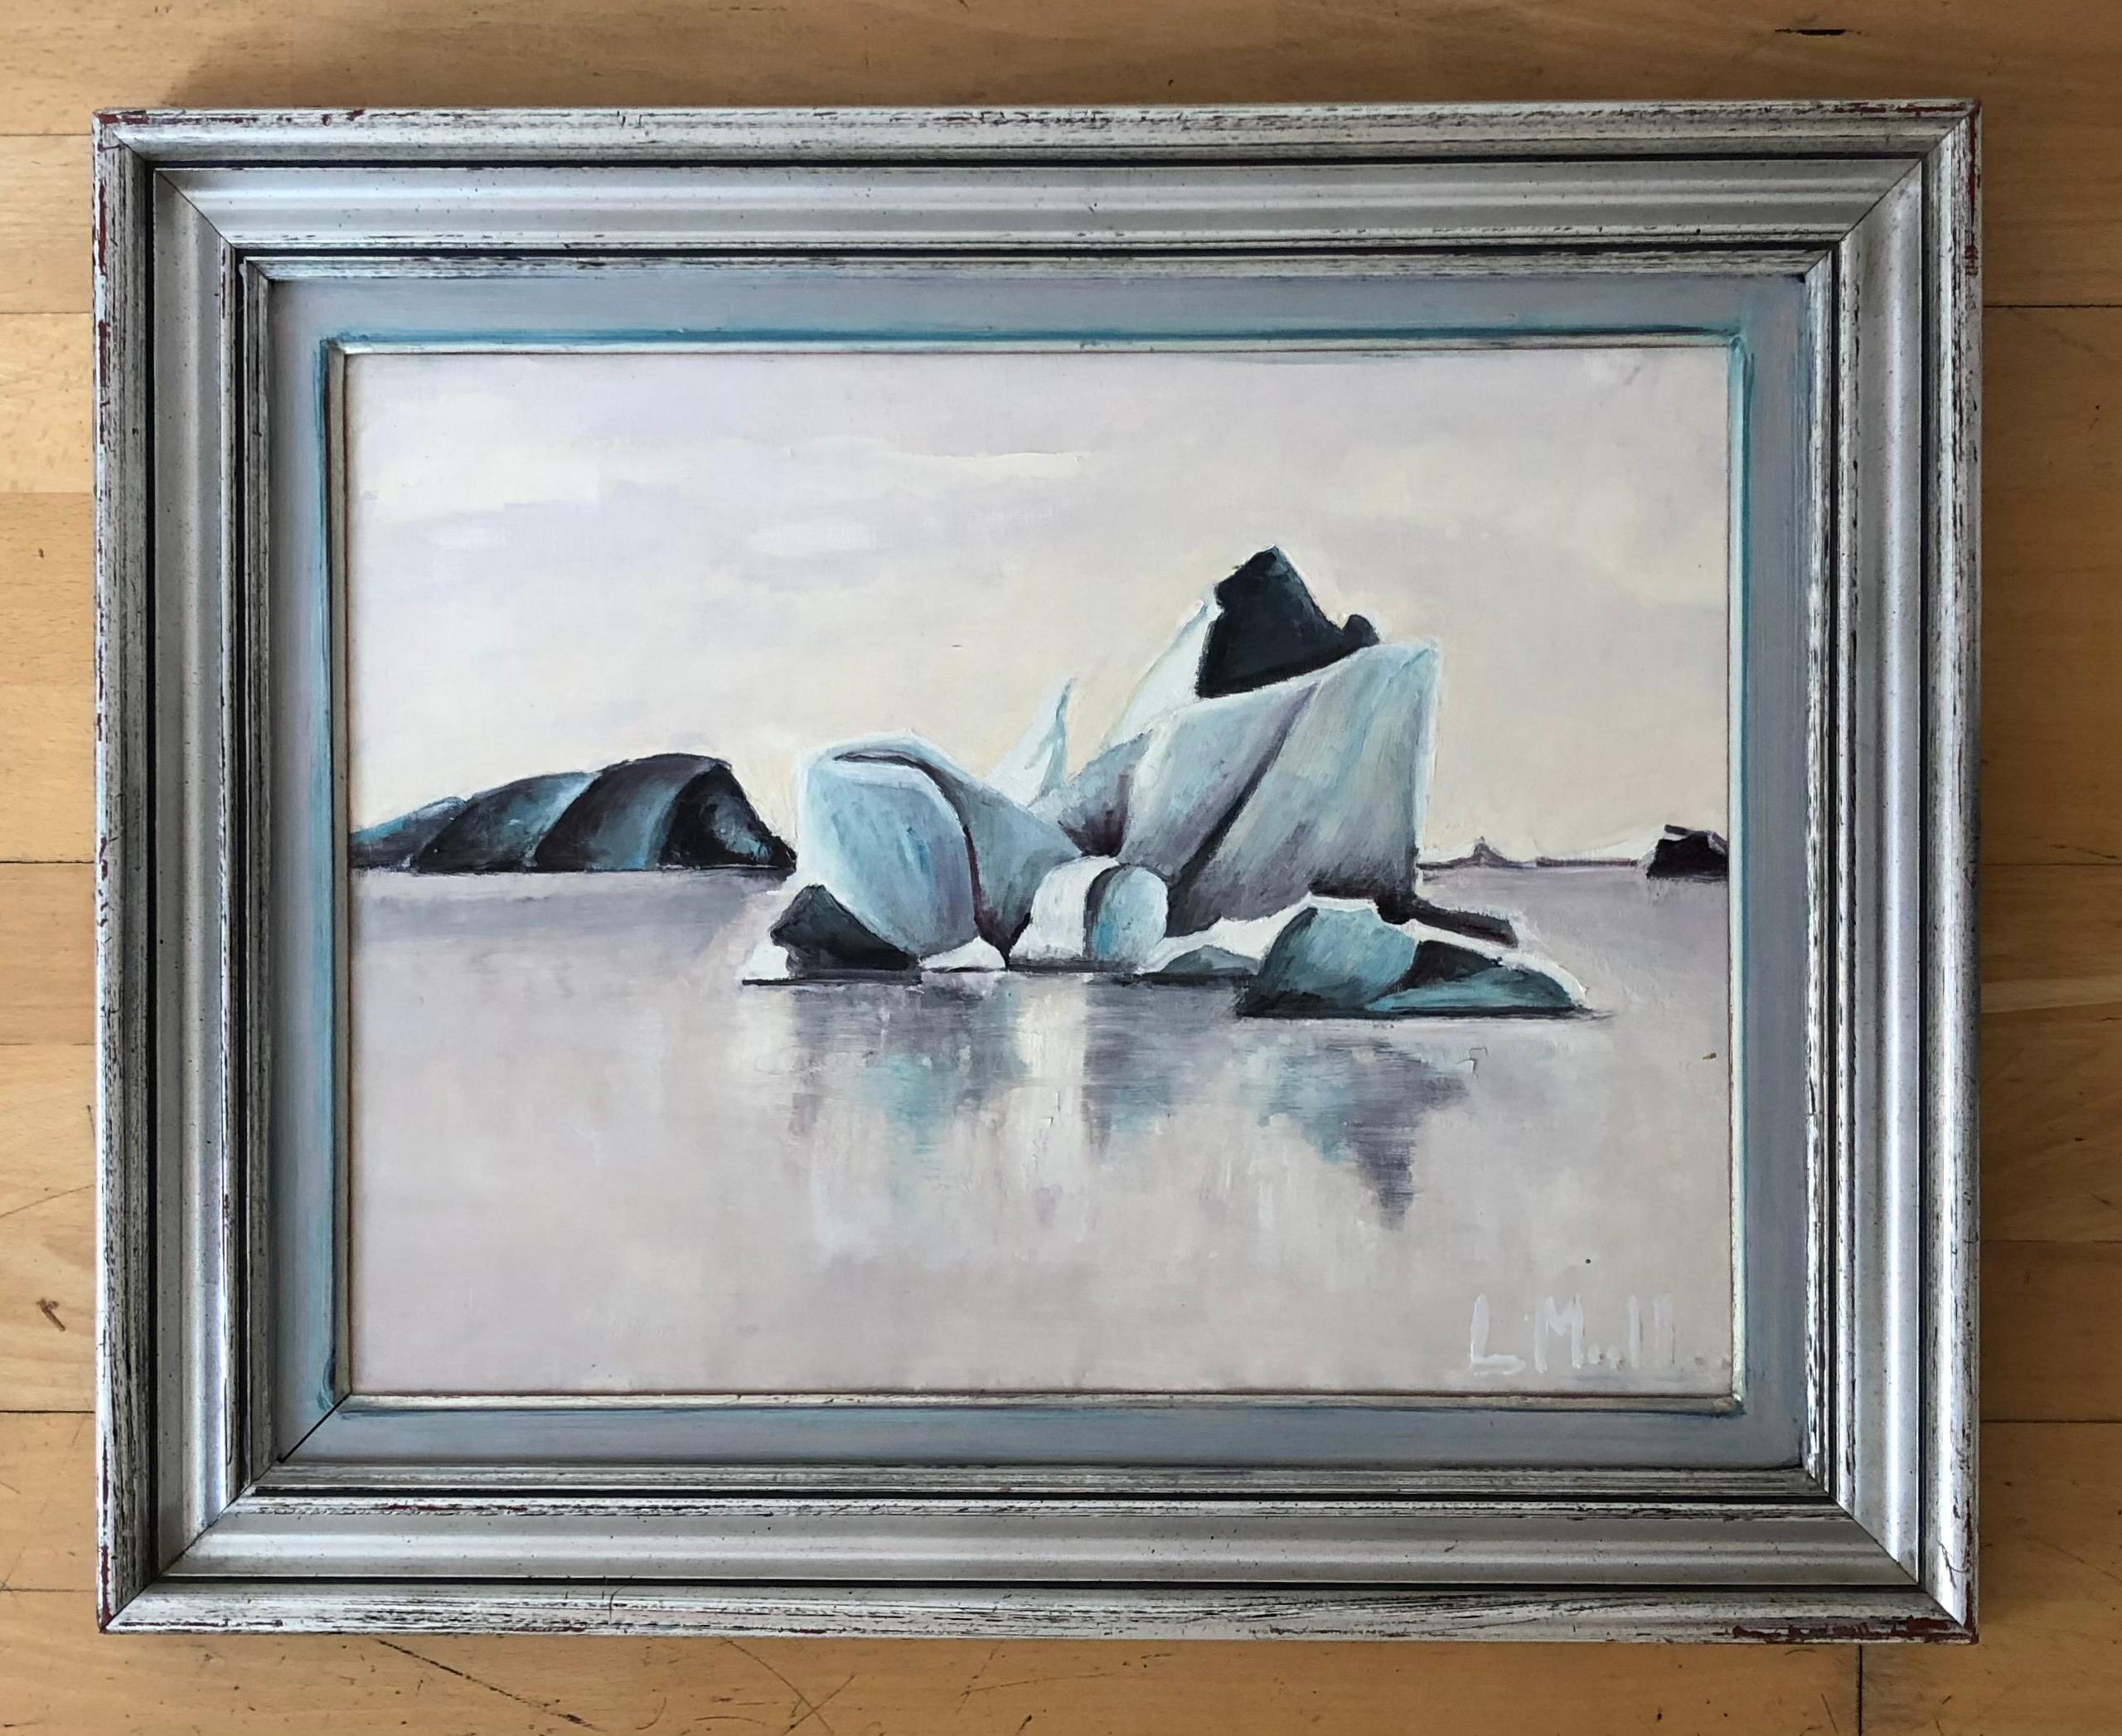 Ice flower - Painting by L. Mull